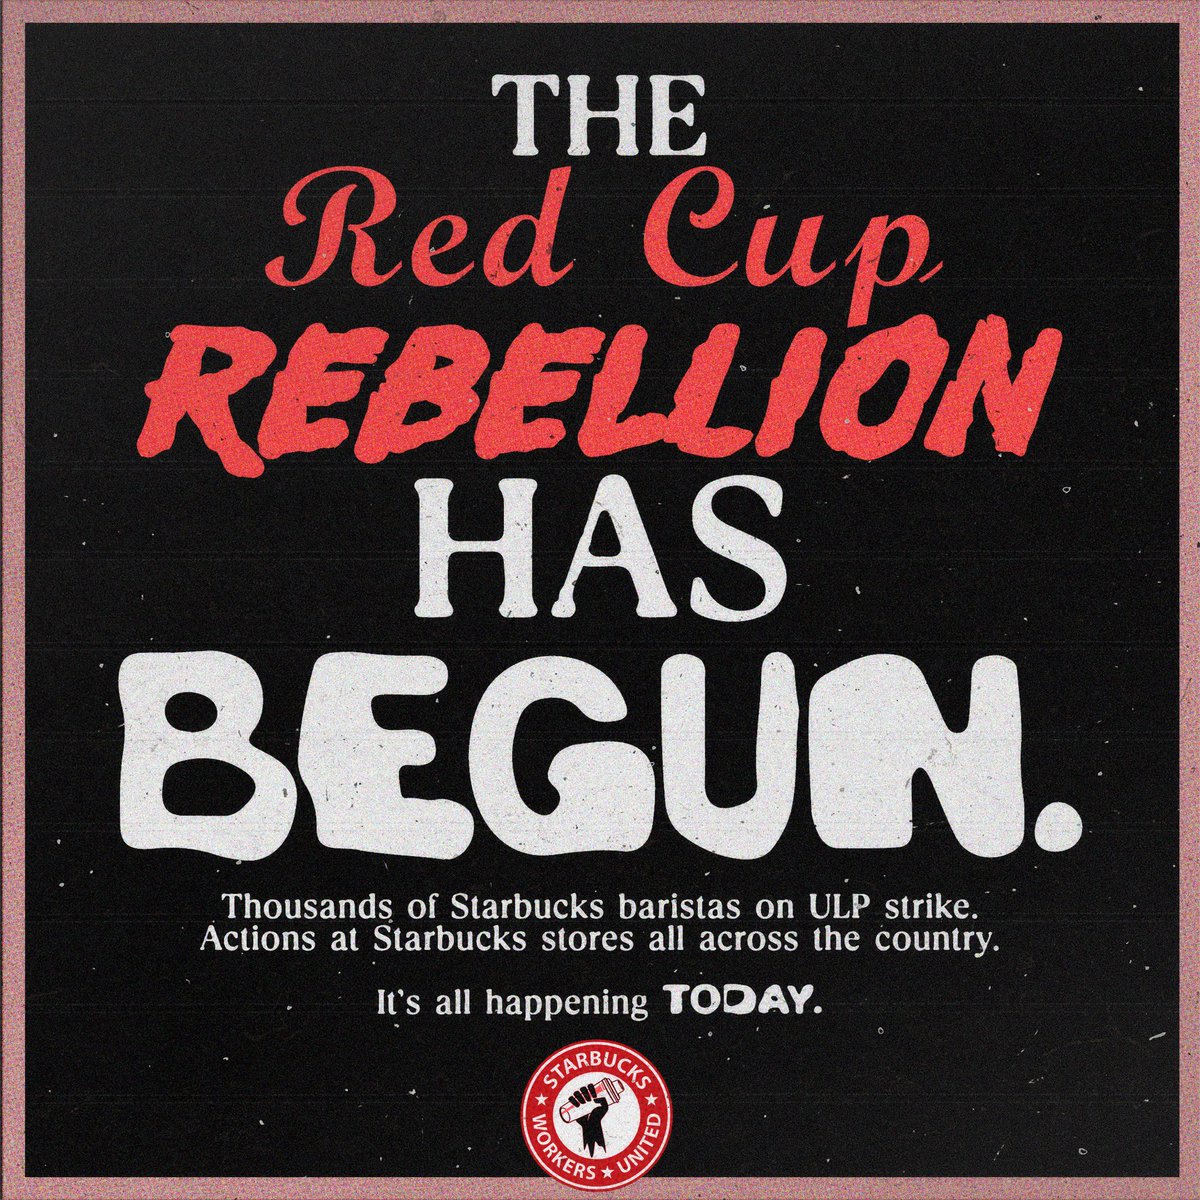 The largest Starbucks strike in HISTORY has officially kicked off. It’s time for the #RedCupRebellion ✊🔥 LETS GO!! Join an action near you - check out the map and other ways to support us today at bit.ly/m/SBWU